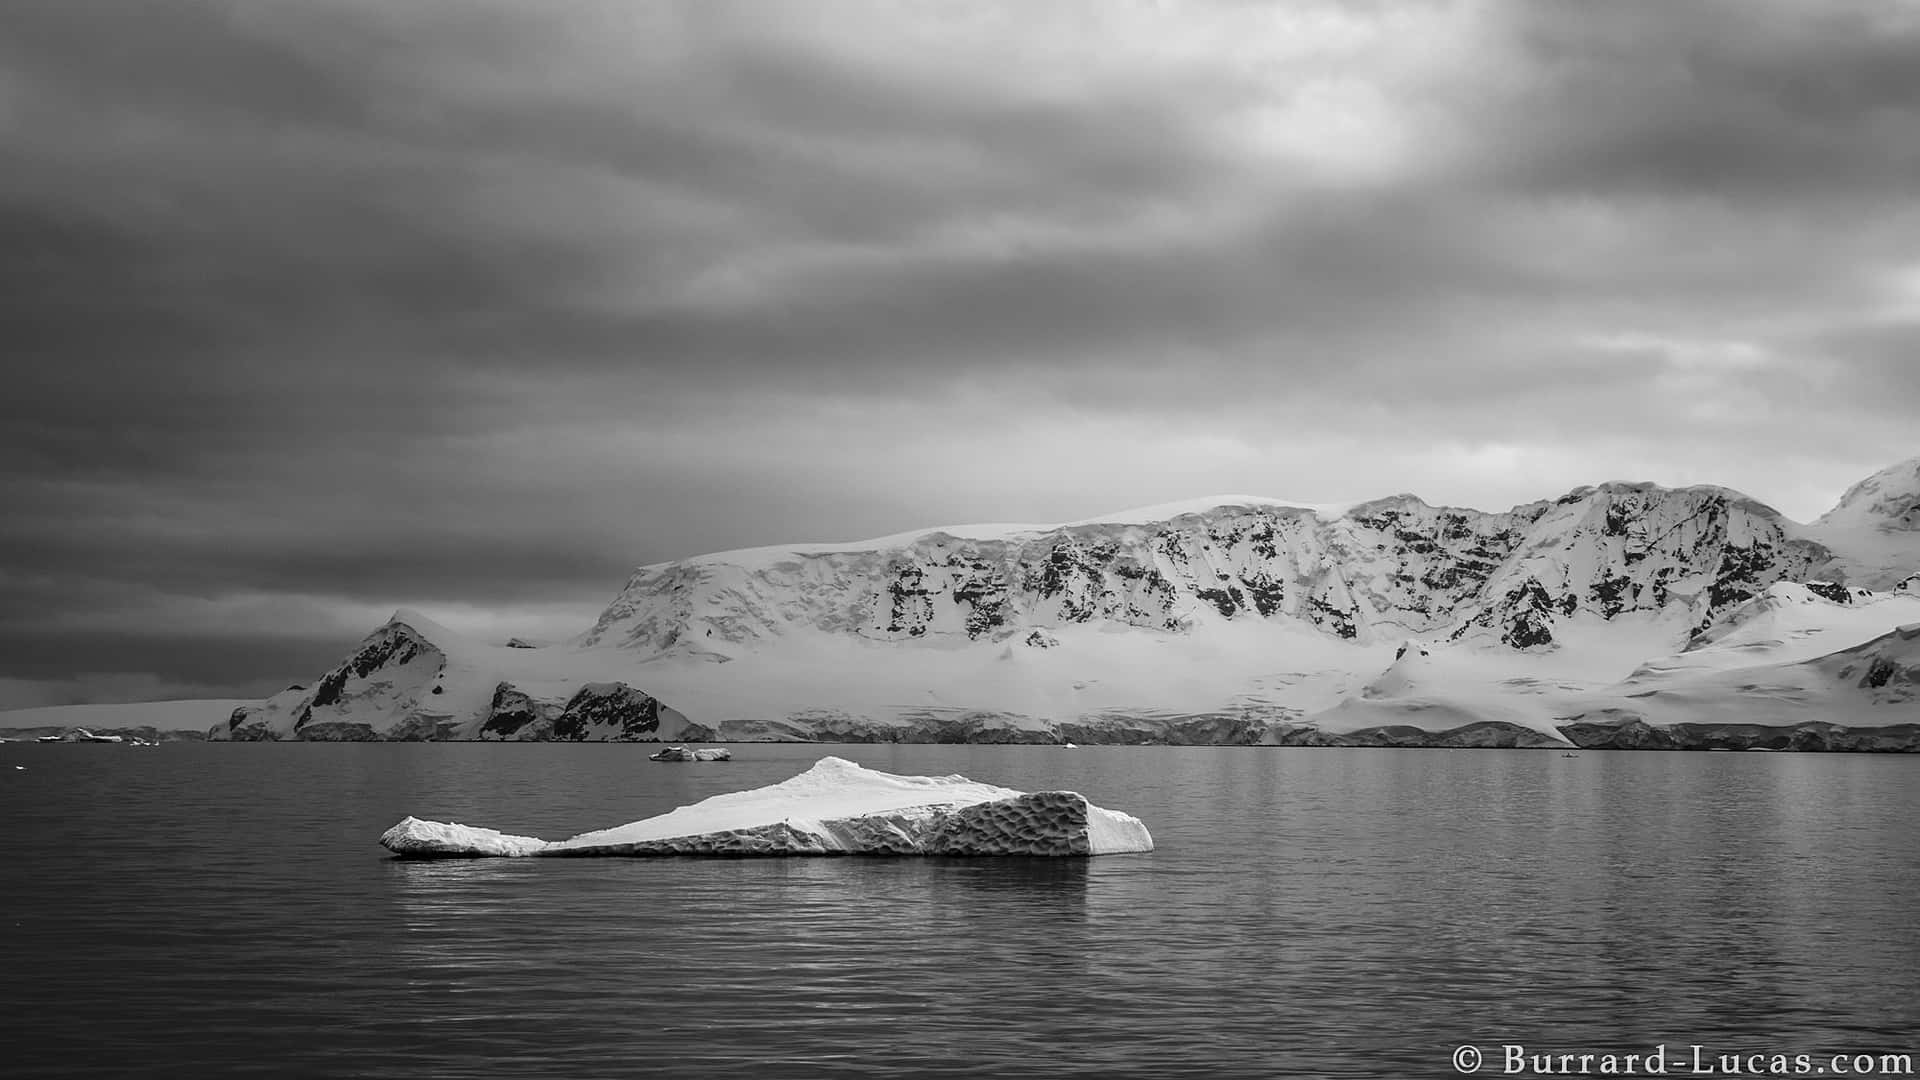 A beautiful snapshot of dreamy landscapes of Antarctica